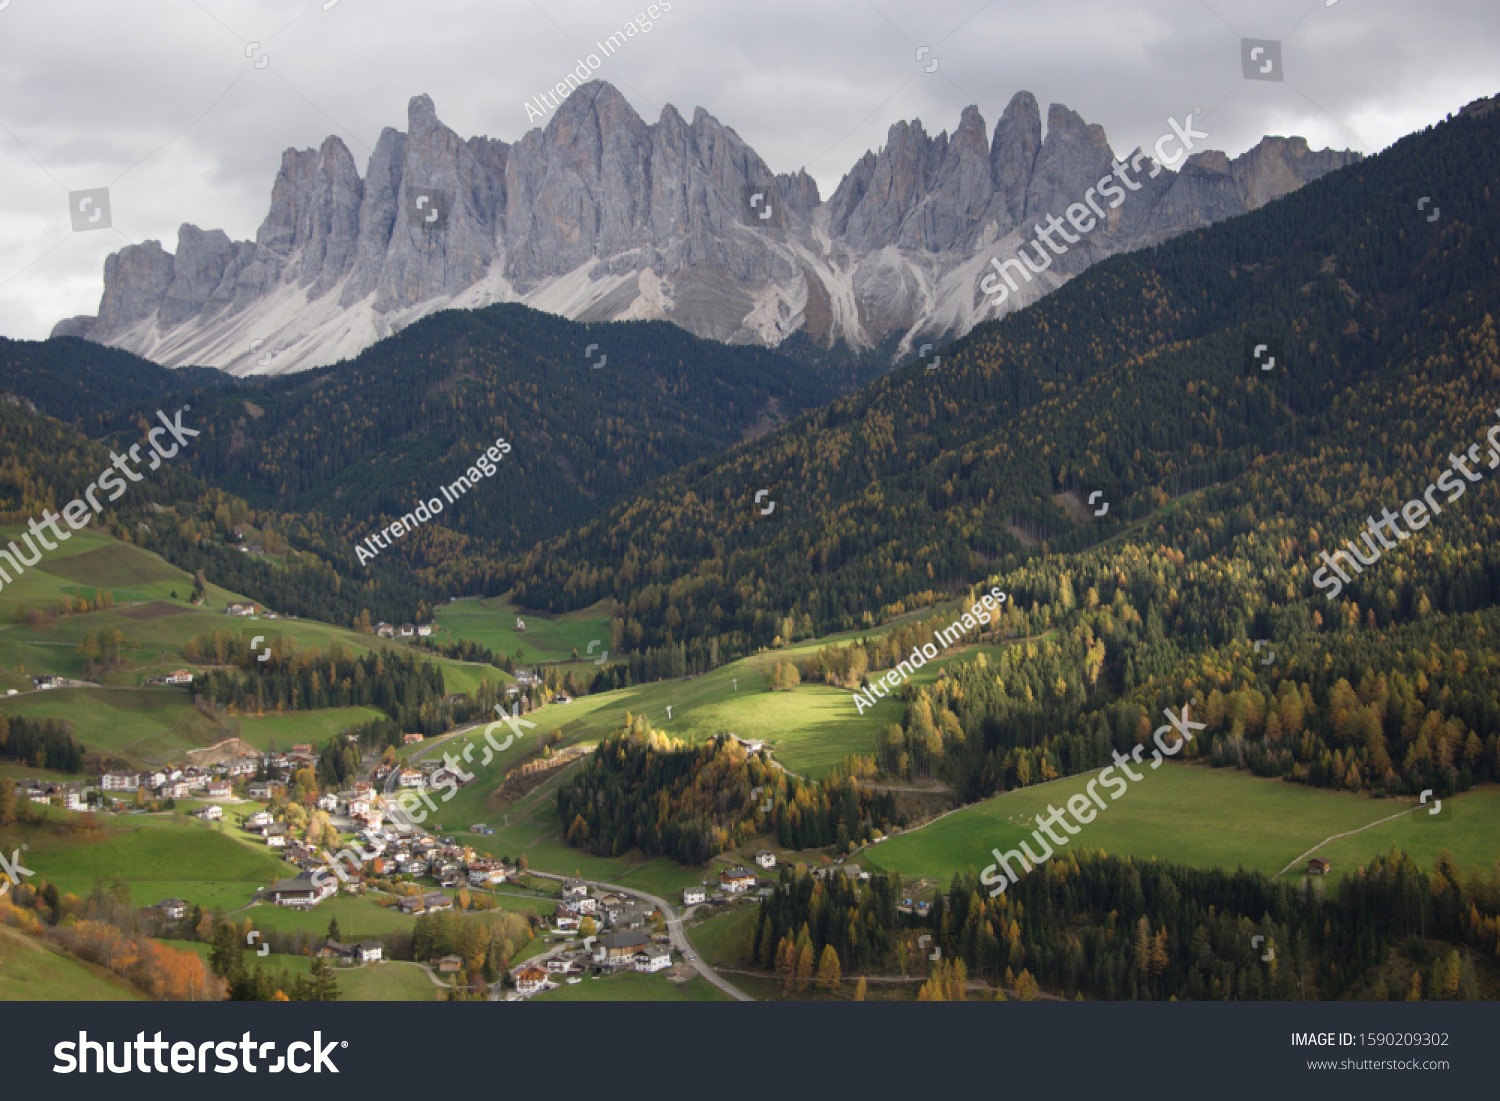 Scenic view of Villnoss Valley and Geislergruppe, Dolomite Alps, South Tyrol, Italy #1590209302